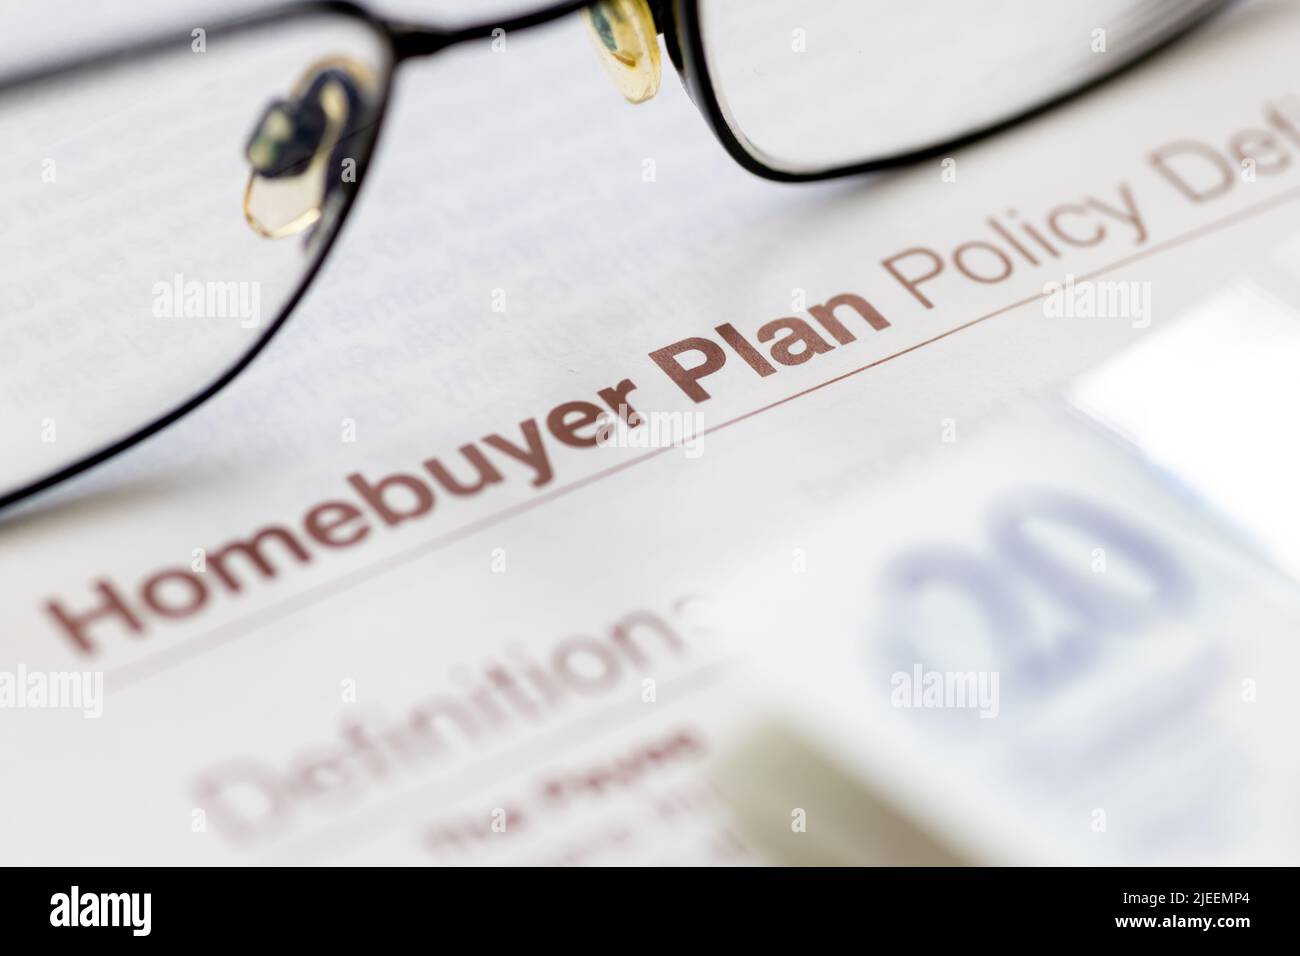 Close up of a life insurance policy document for homebuyer shown with a pair of glasses and bank notes. Stock Photo